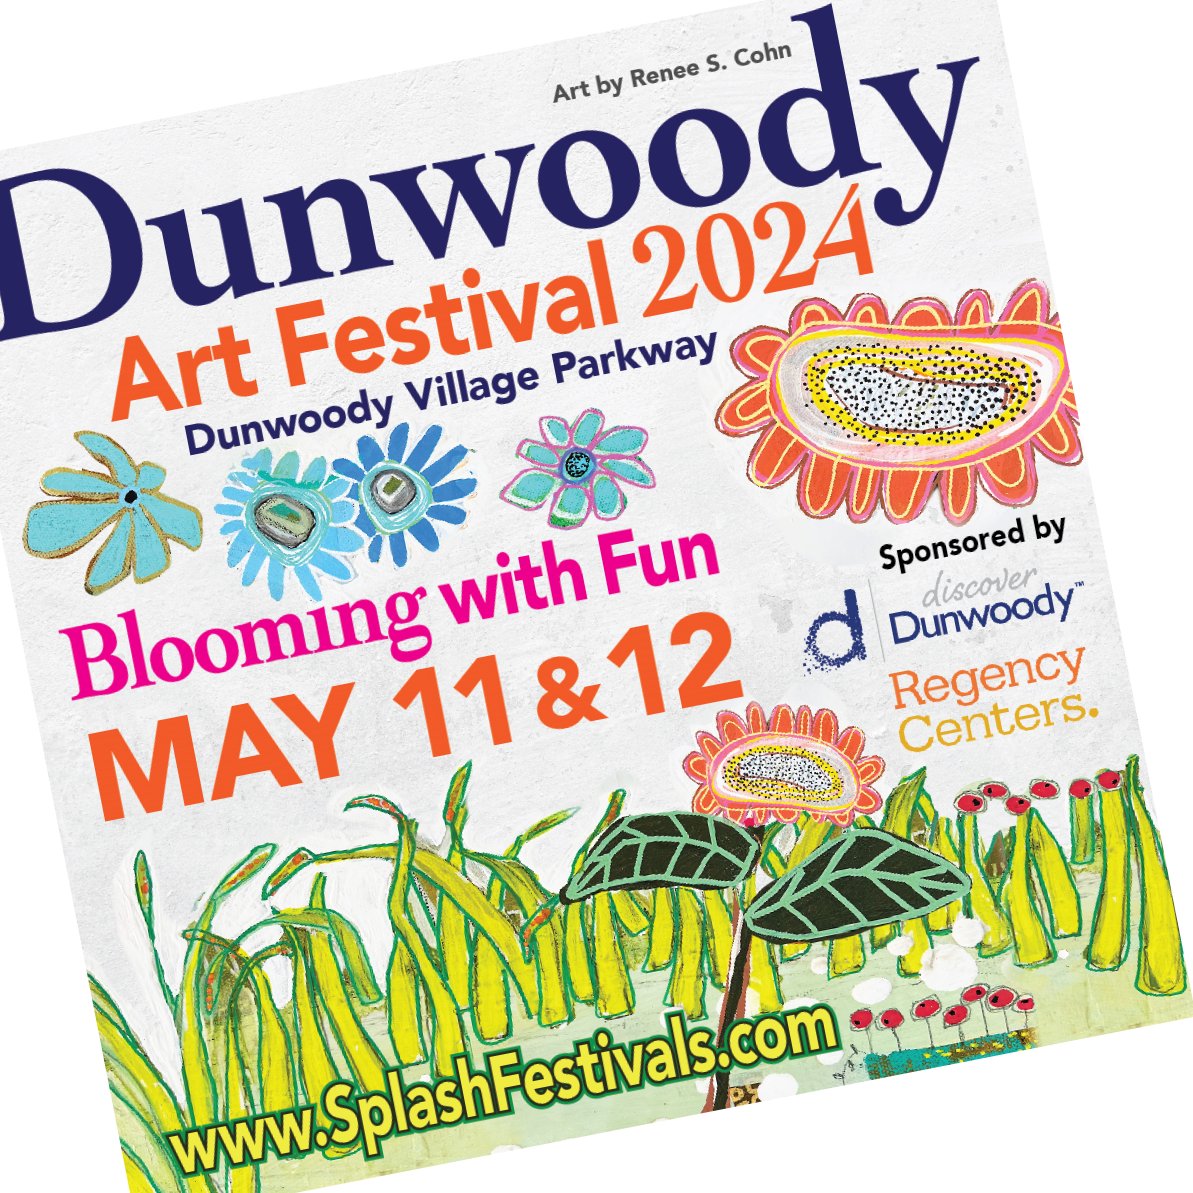 Bring Mama to Dunwoody Art Festival and visit @DunwLibr Pop-up Book Sale today, until 5:00.
Dunwoody Village.  
Gently used books for readers of all ages. 
Thrillers, mysteries, classics, more!
Get ready for #SummerReading.